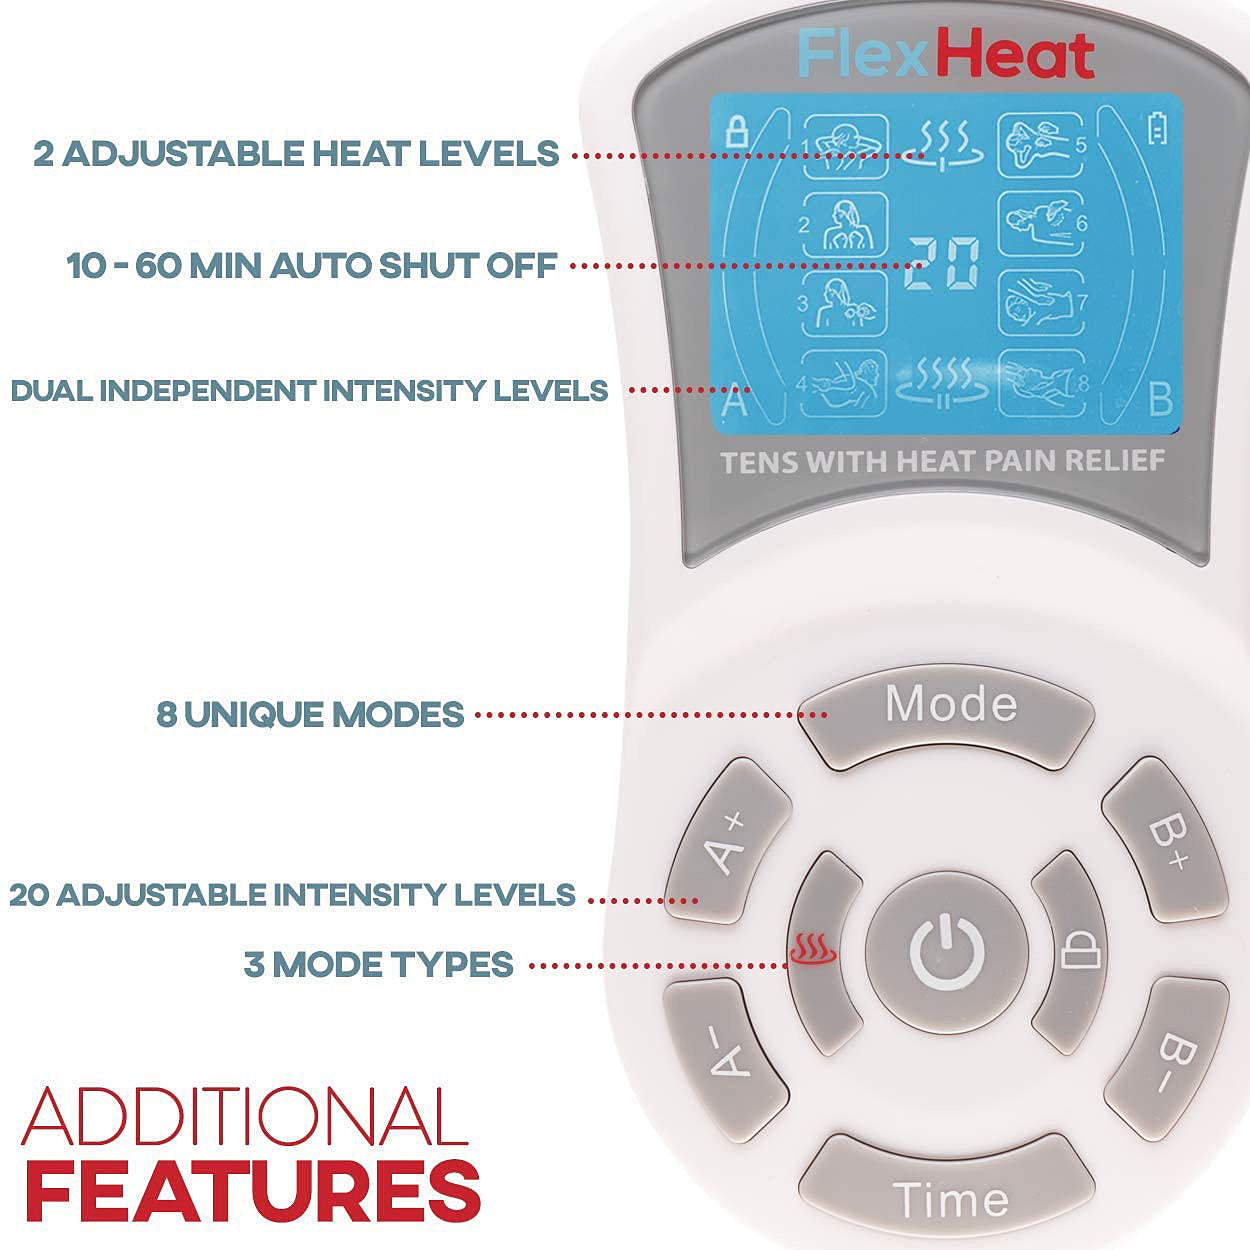 FLEXHEAT - The only simultaneous TENS with HEAT in the world!